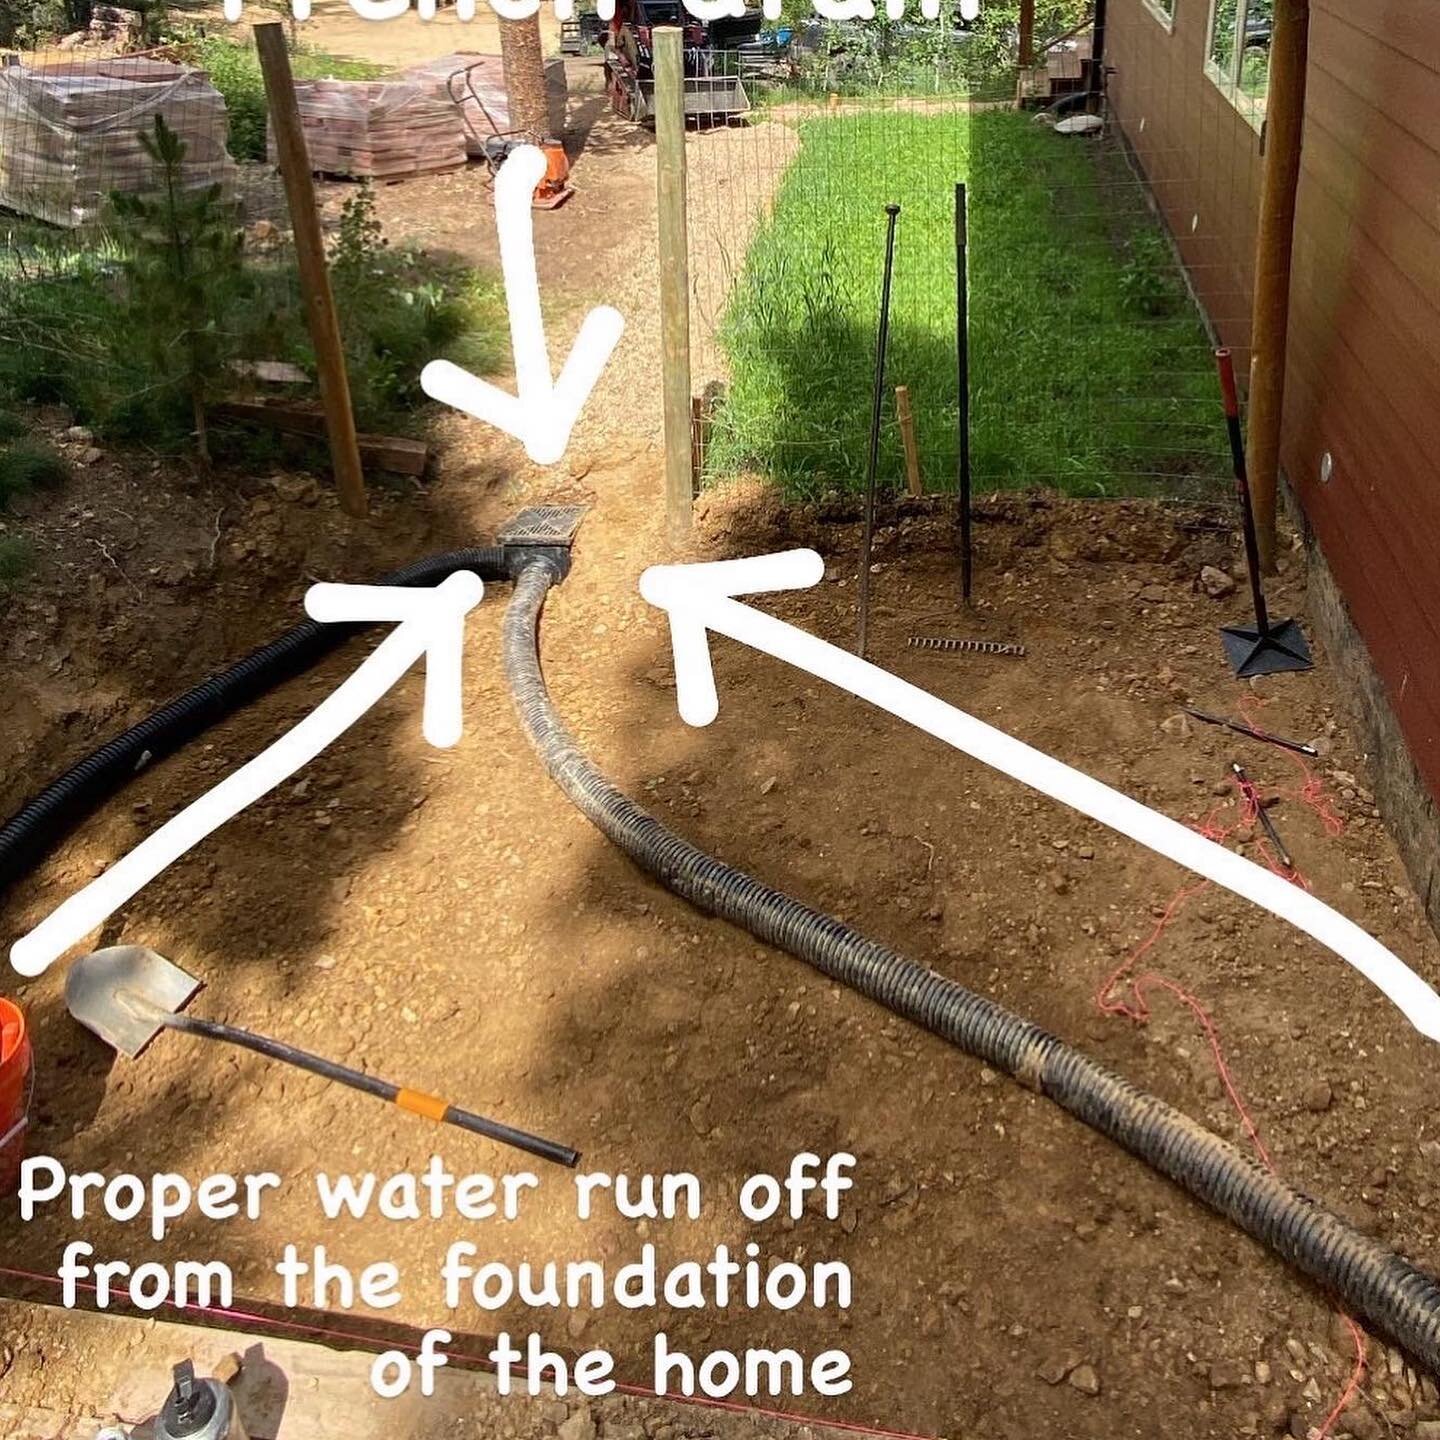 My client told me he experiences flooding in his basement every spring. 

Whether it&rsquo;s heavy rain or snow melt, flooding basements, and muddy yards are not only unpleasant but they are also a threat to your homes foundation. 

Designing a custo